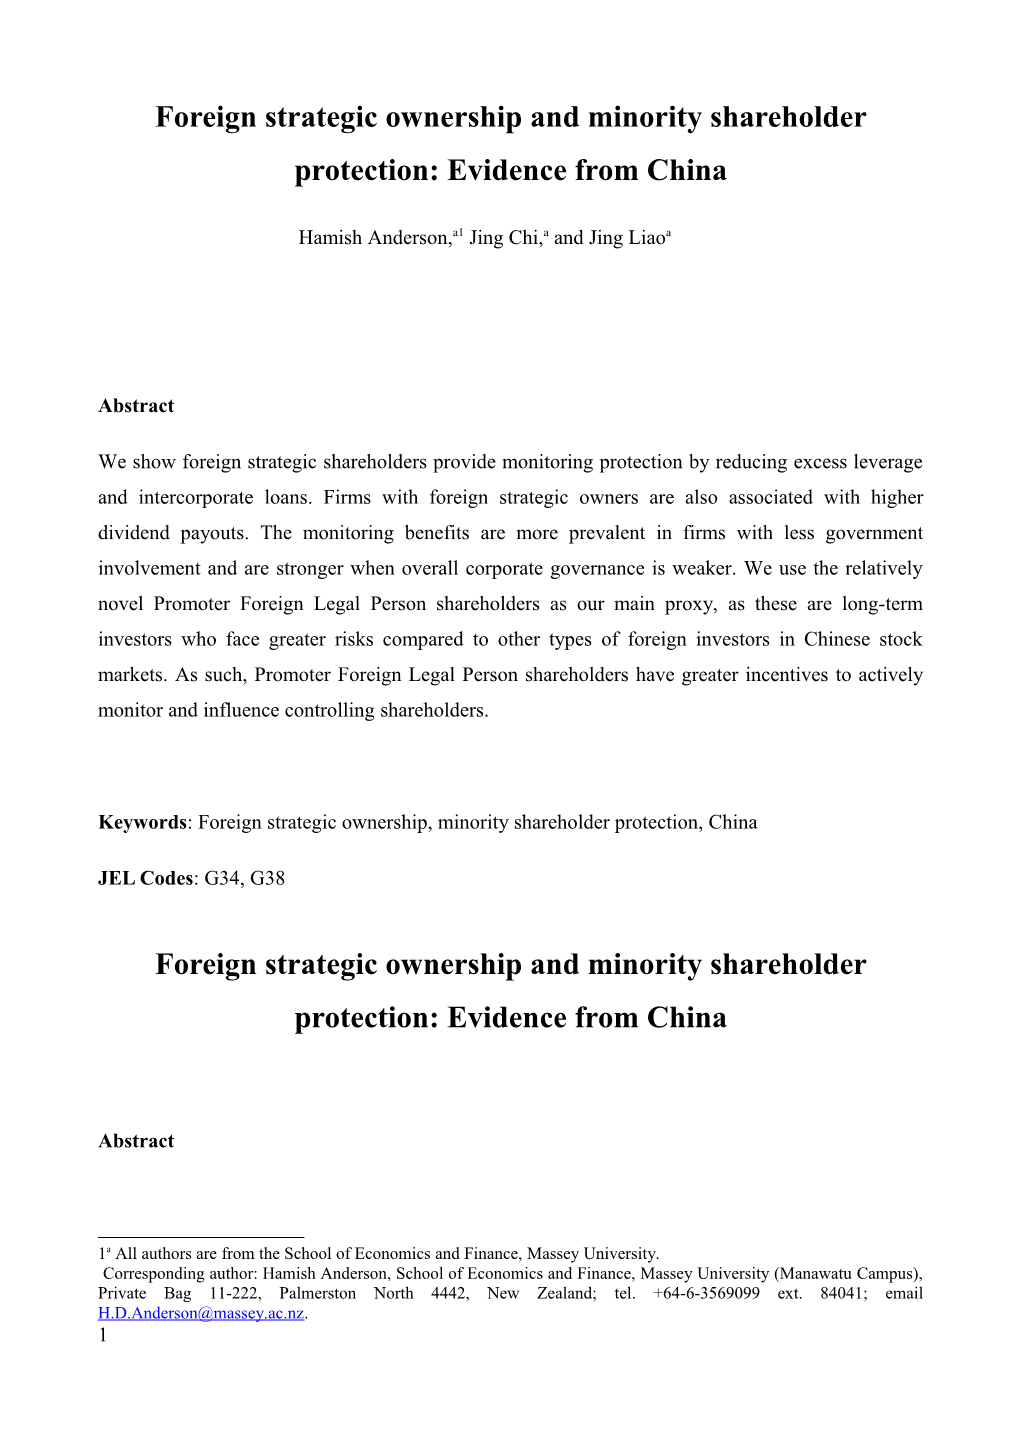 Foreign Strategic Ownership and Minority Shareholder Protection: Evidence from China